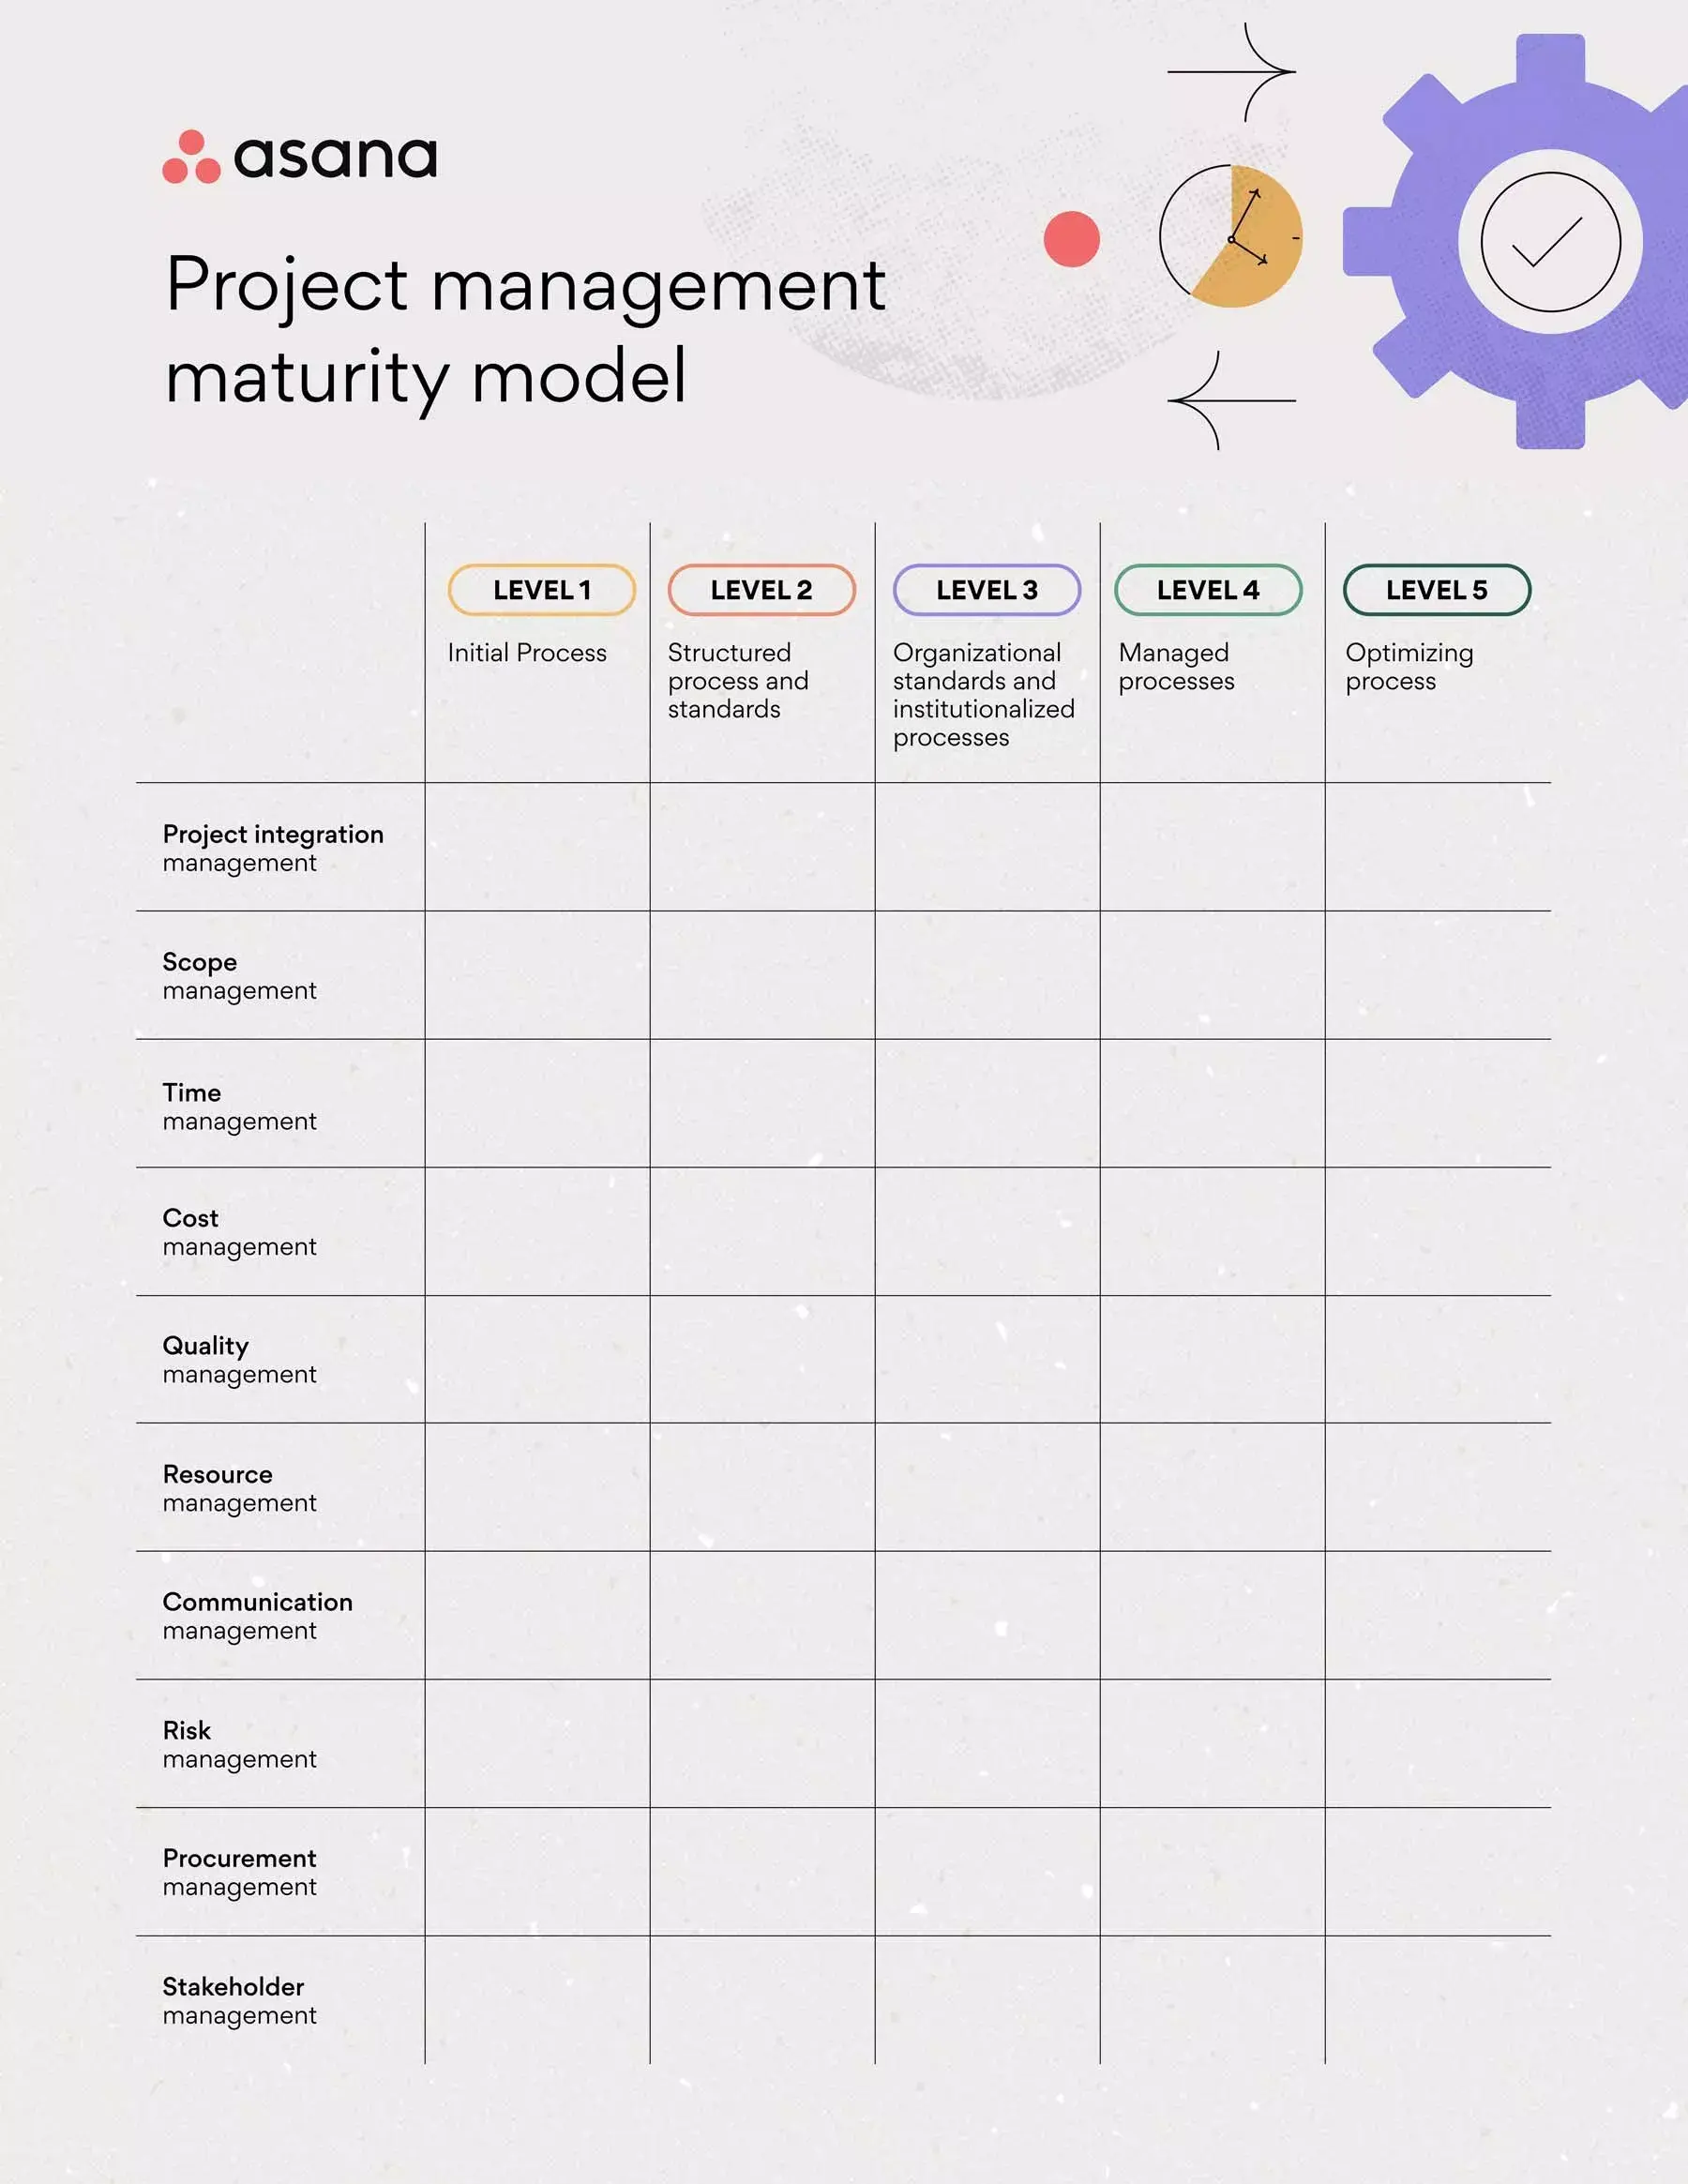 [Inline illustration] Project management maturity model (example)